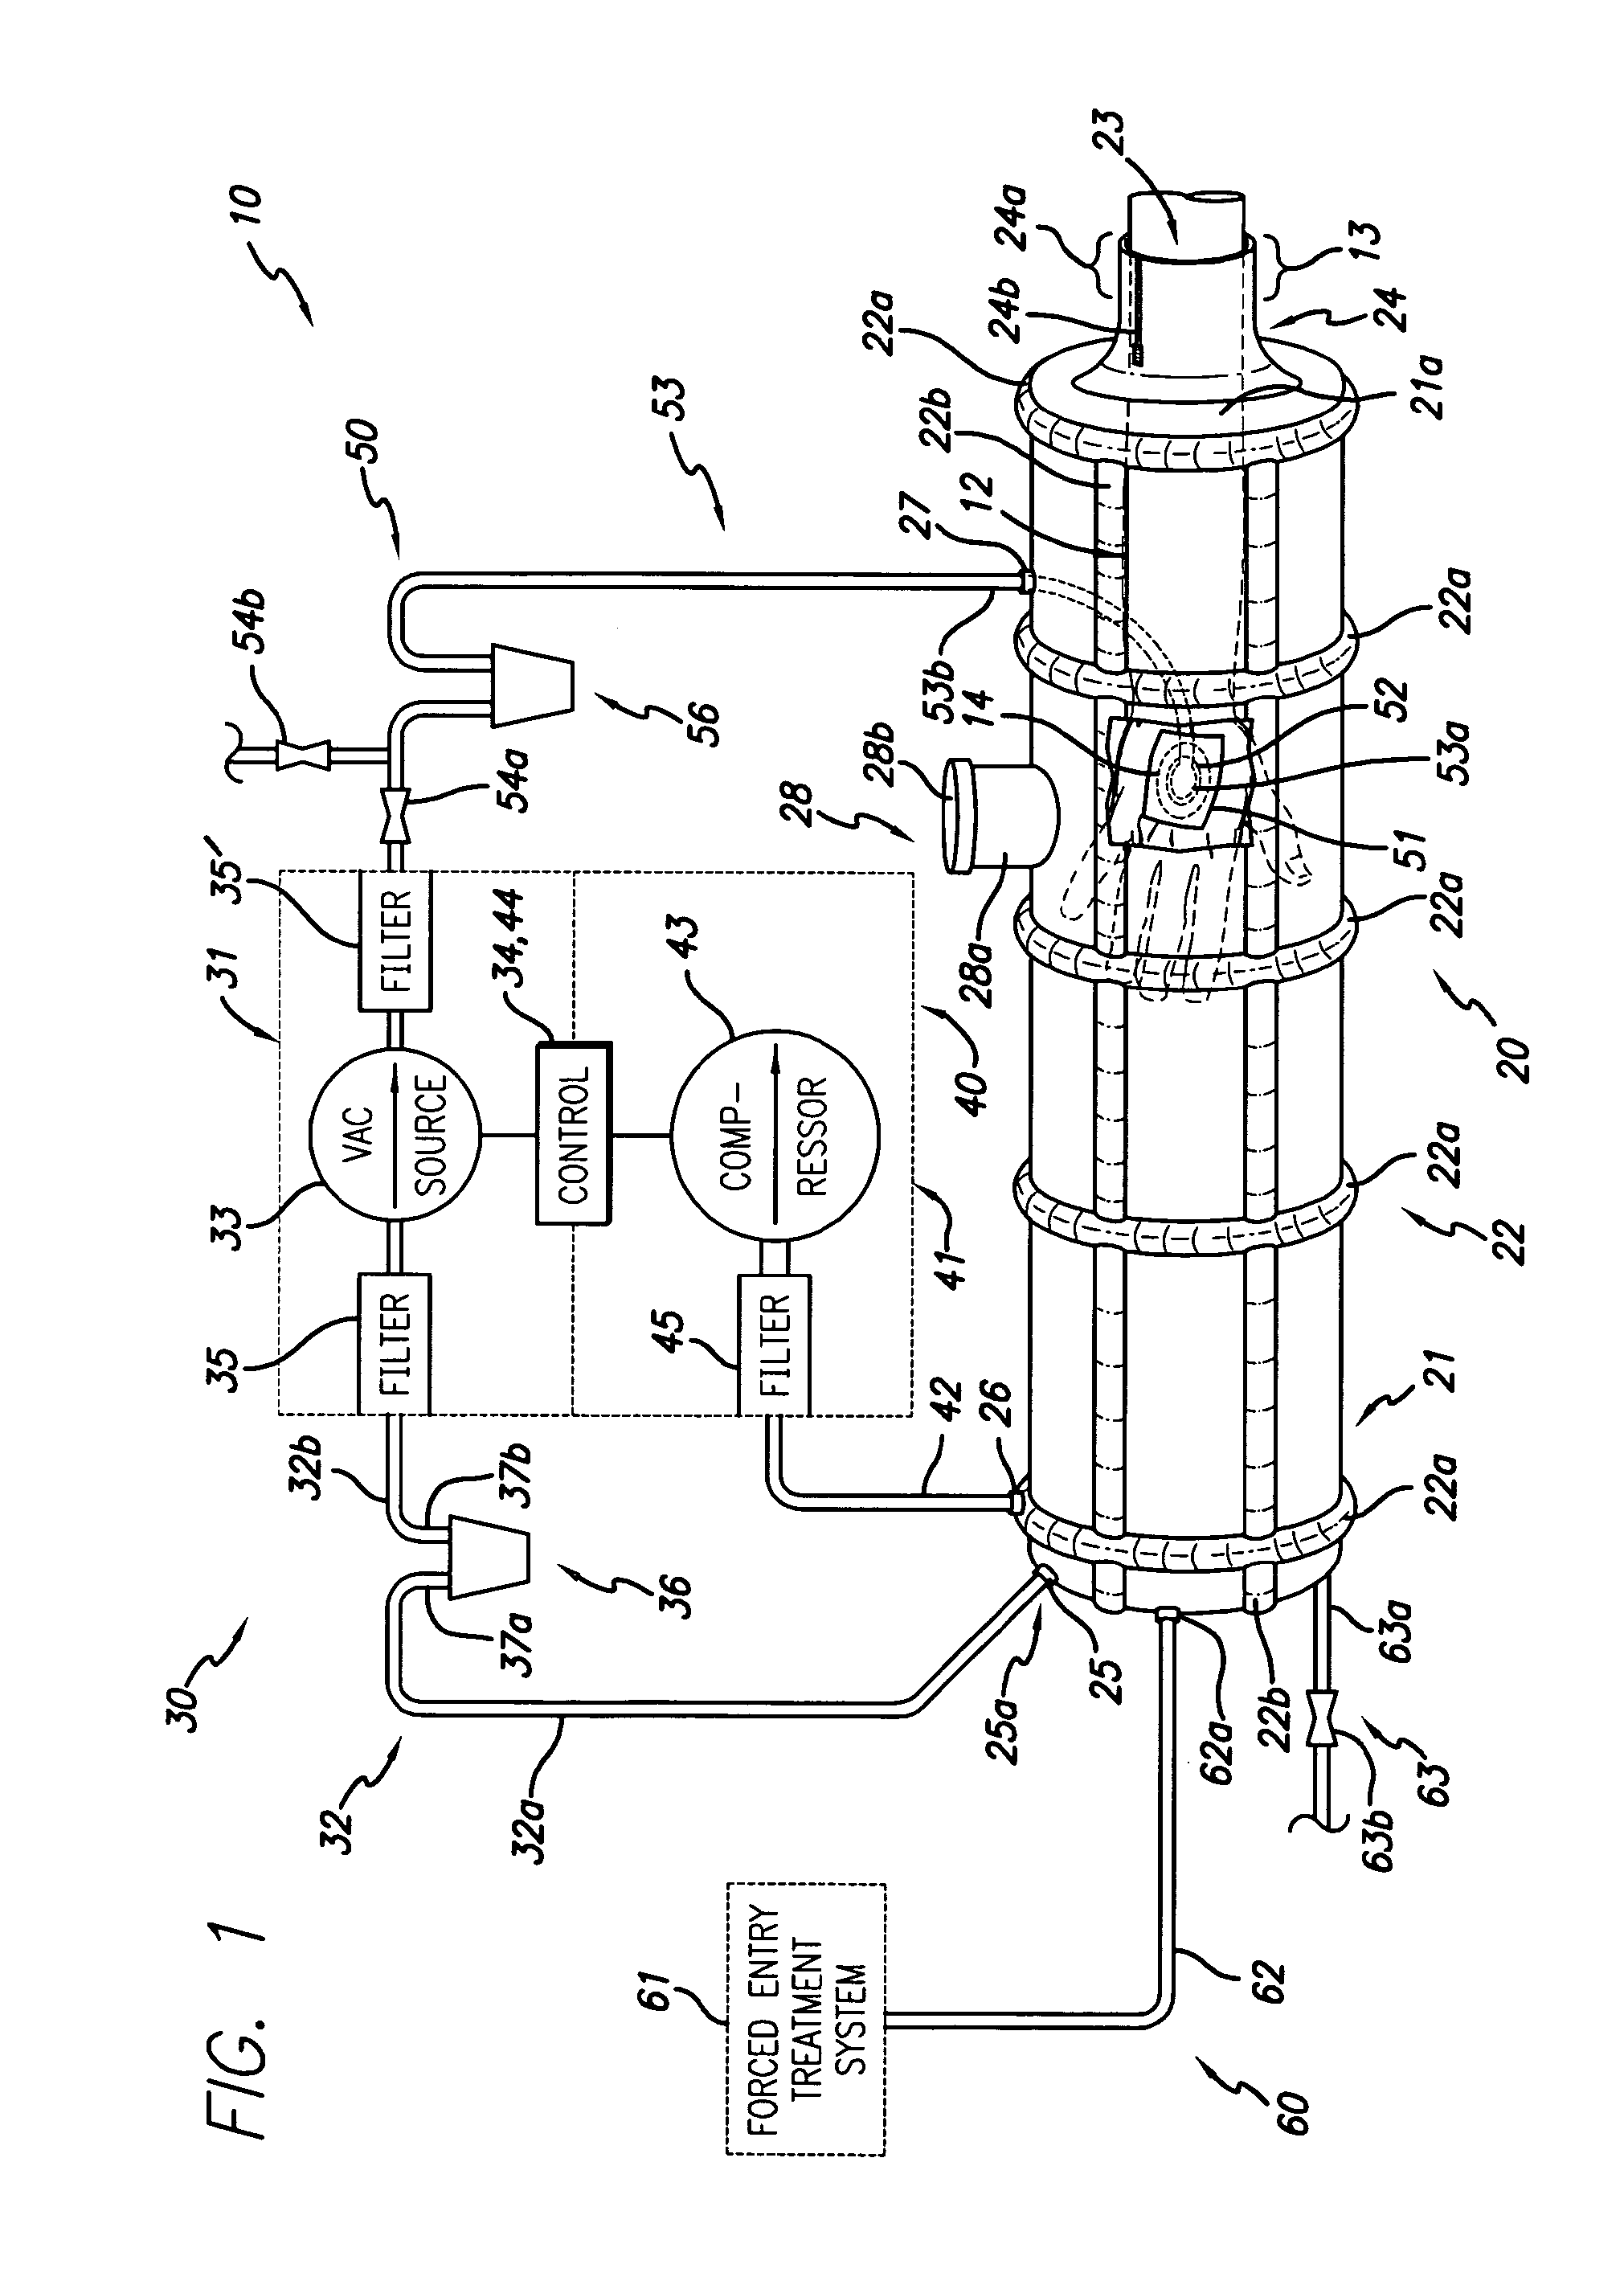 Hypobaric chamber treatment system